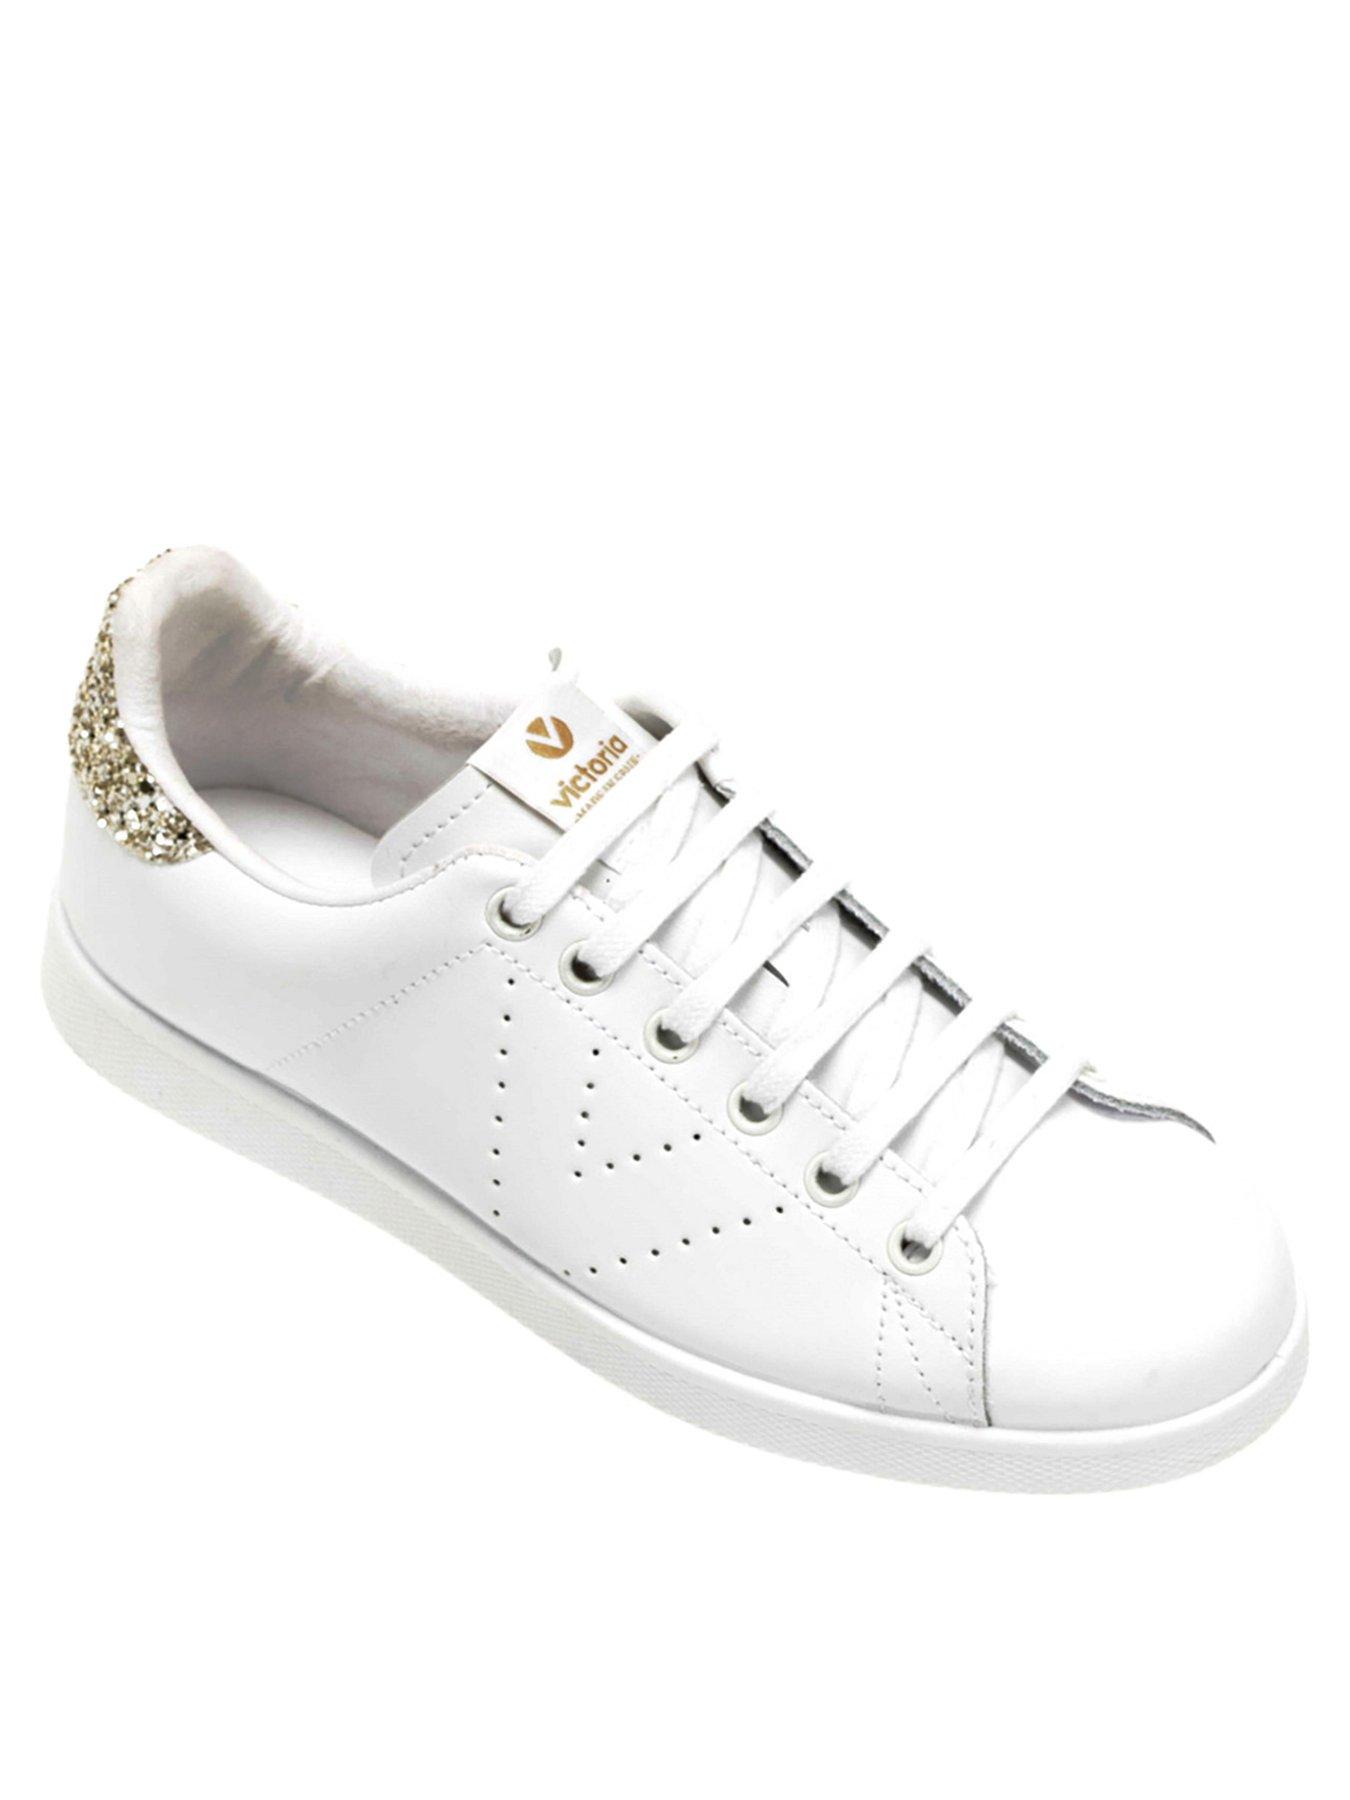 Victoria Trainers with Coco Heel Tab 